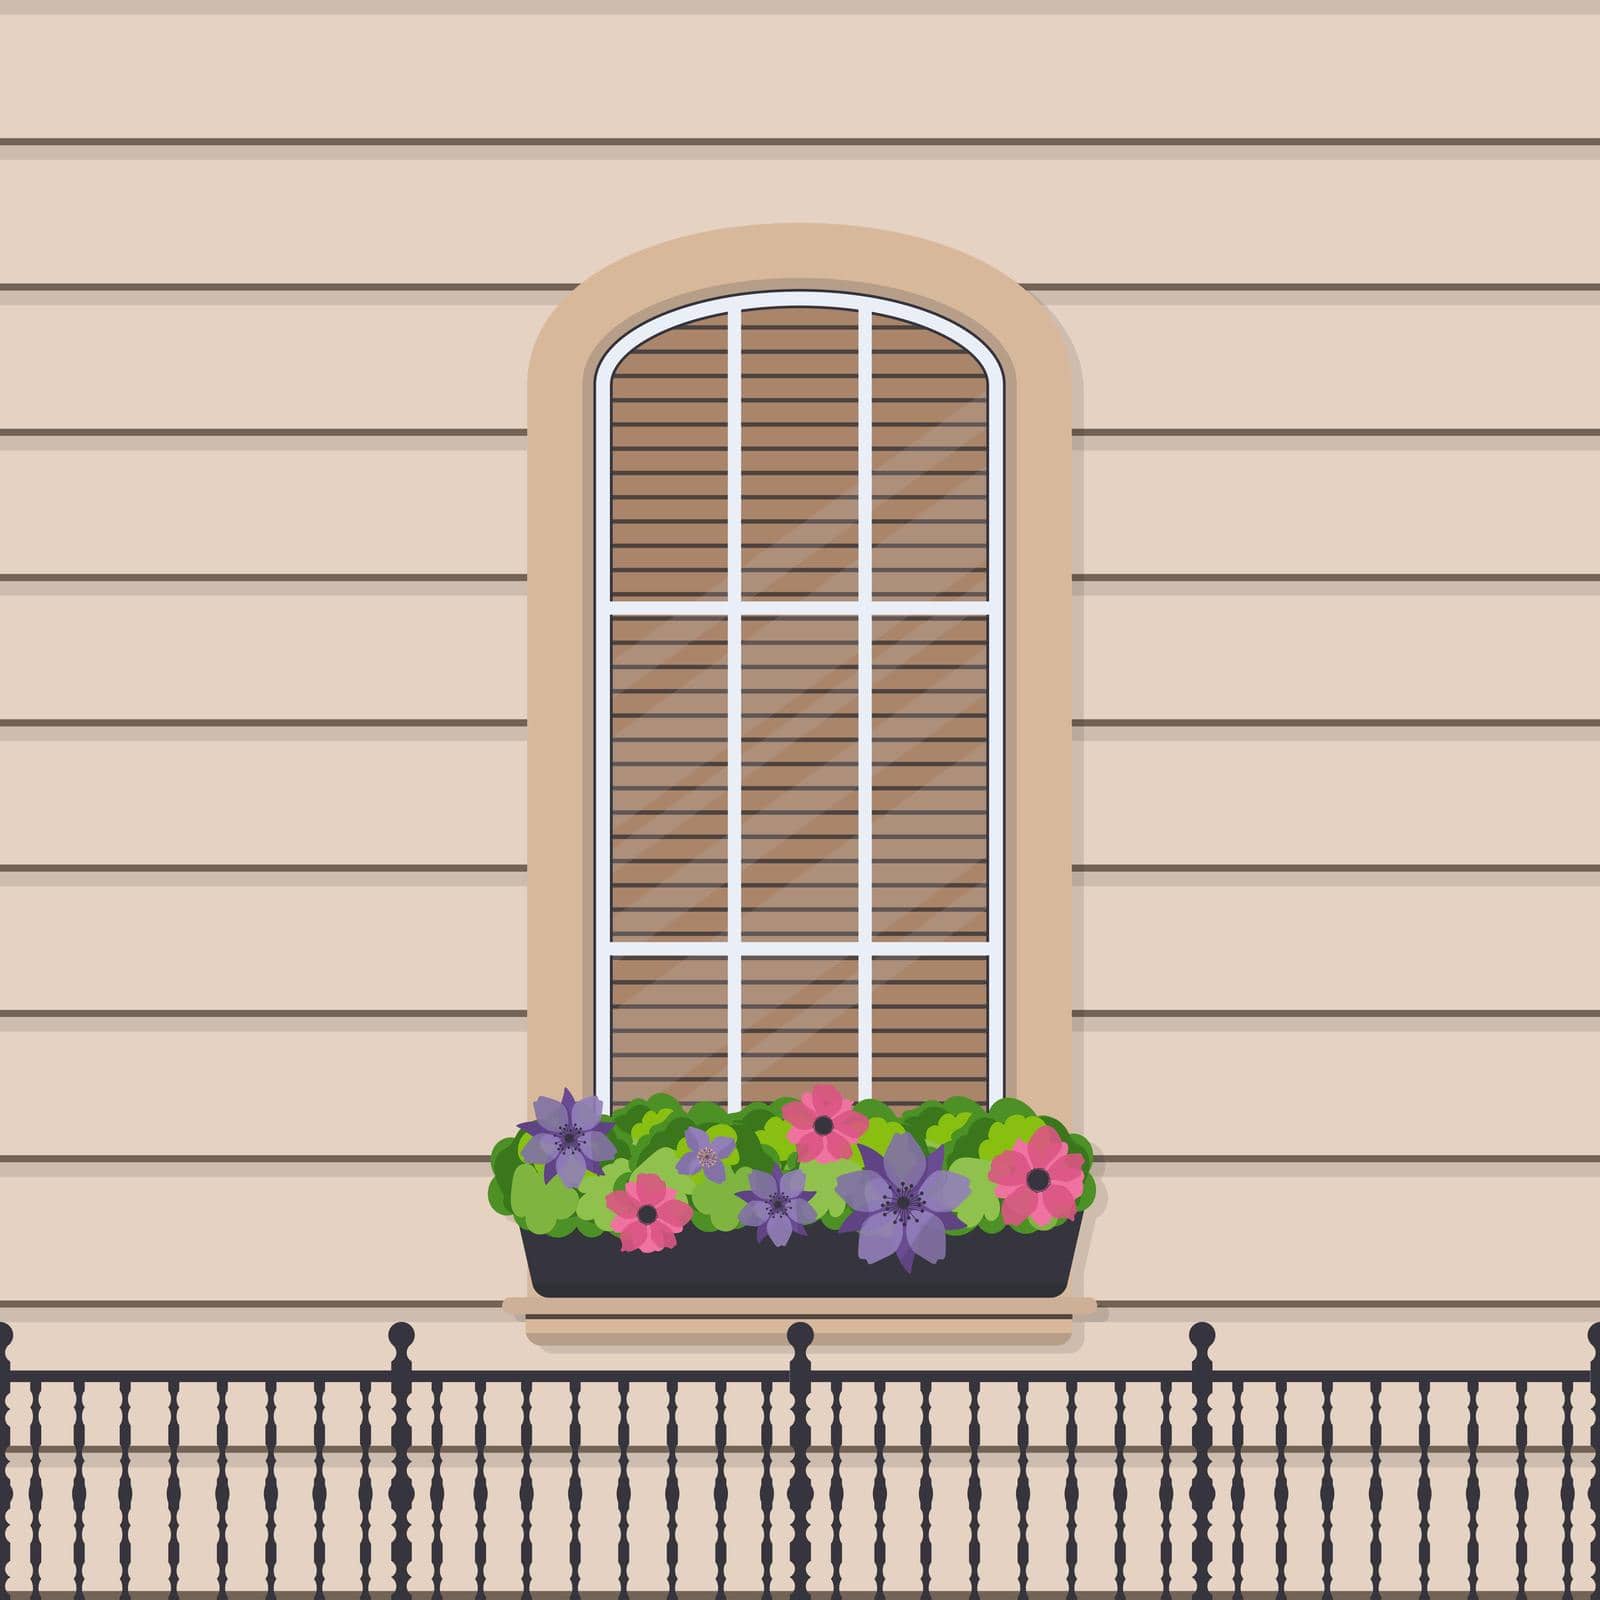 Semicircular window with flowers in a flat style. Window with shutters. Vector.